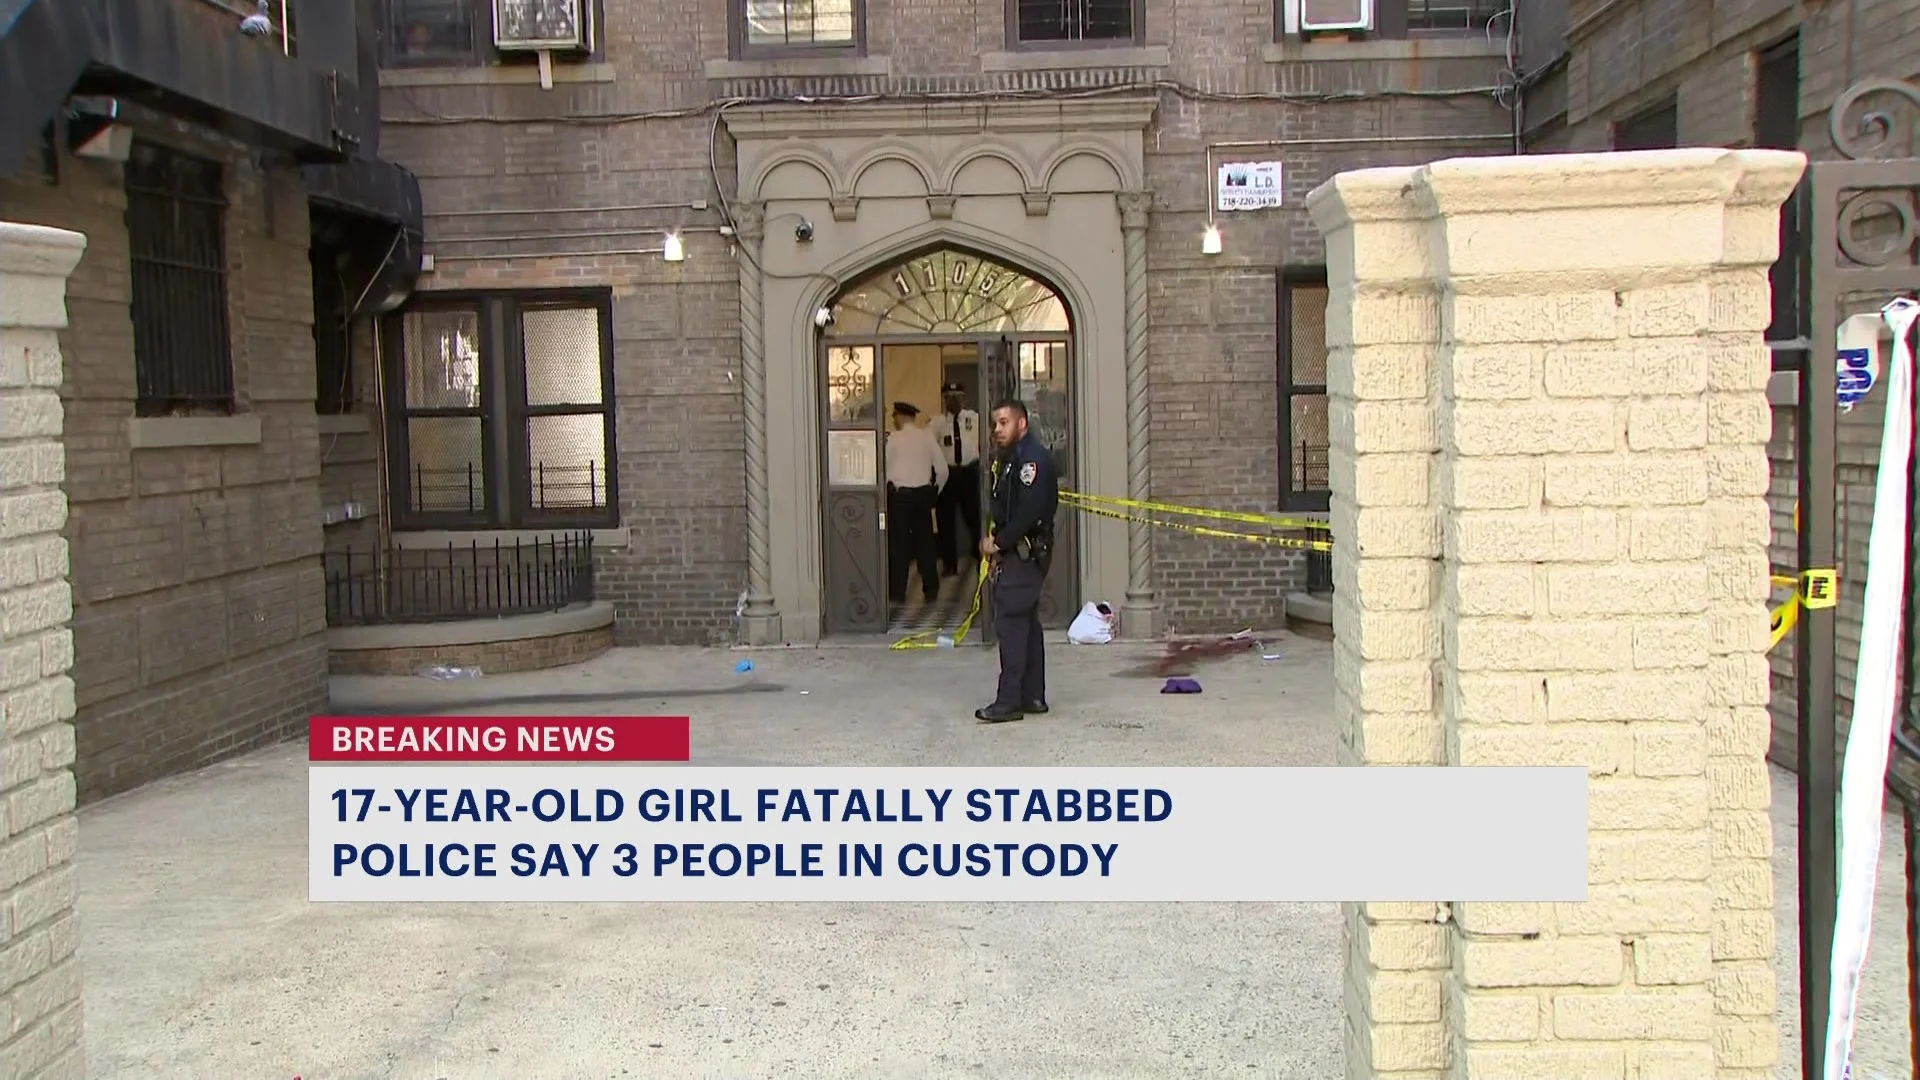 NYPD: 17-year-old girl fatally stabbed in Soundview; 3 people in custody